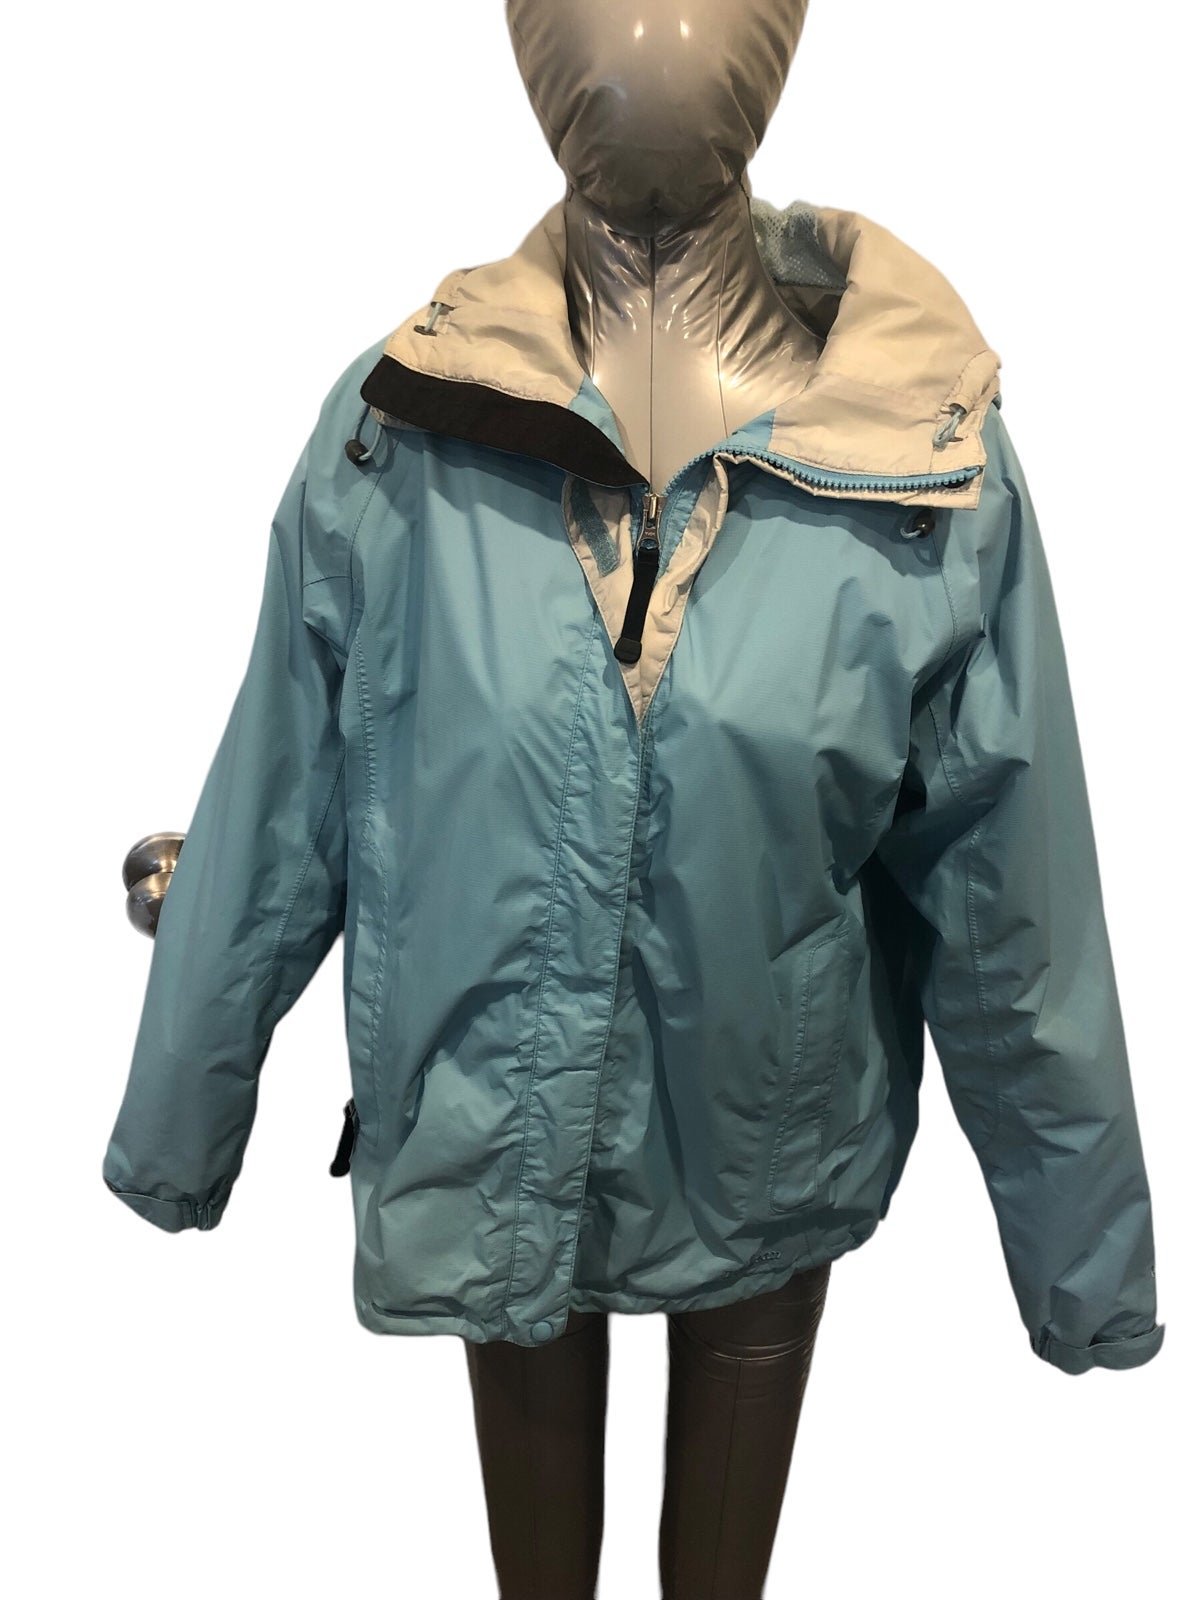 Affordable L.L.Bean Women’s Small light blue jacket out